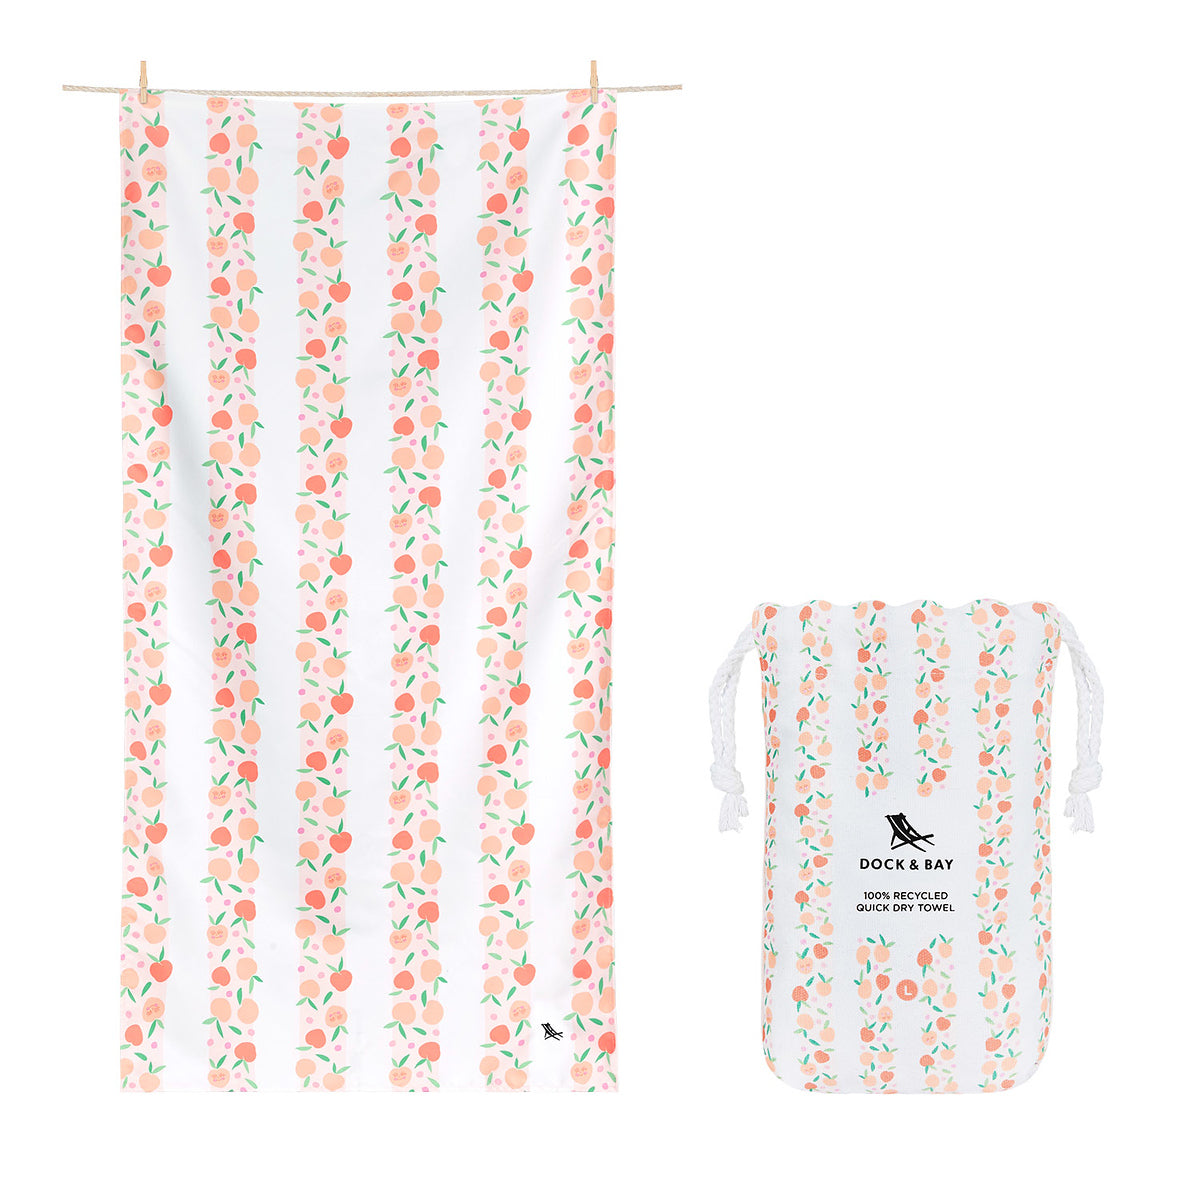 01_TOWLB-KID-PEACH-combo-linepouch-lg-X3.jpg